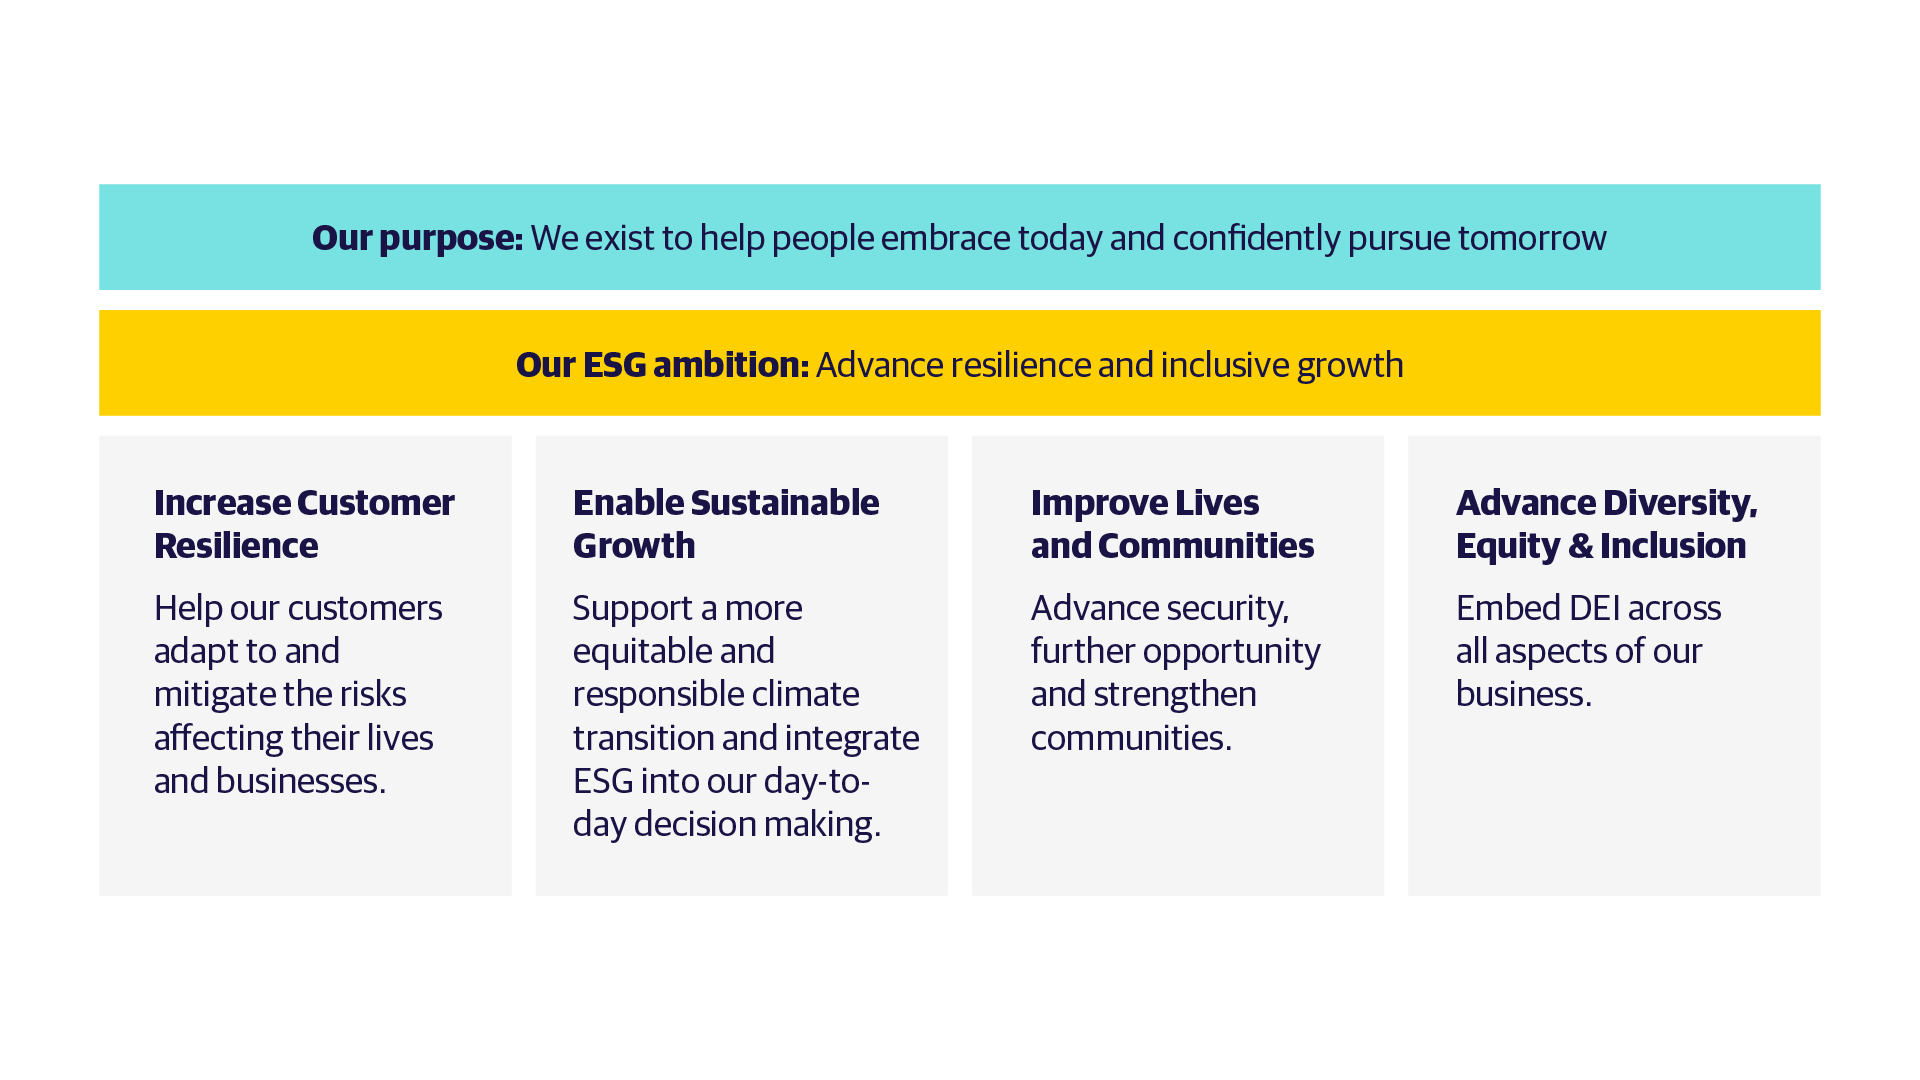 ESG Pillars Document: Our purpose, Our Ambition: Increase Customer Resilience, Enable Sustainable Growth, Improve Lives and Communities and Advance Diversity, Equity and Inclusion